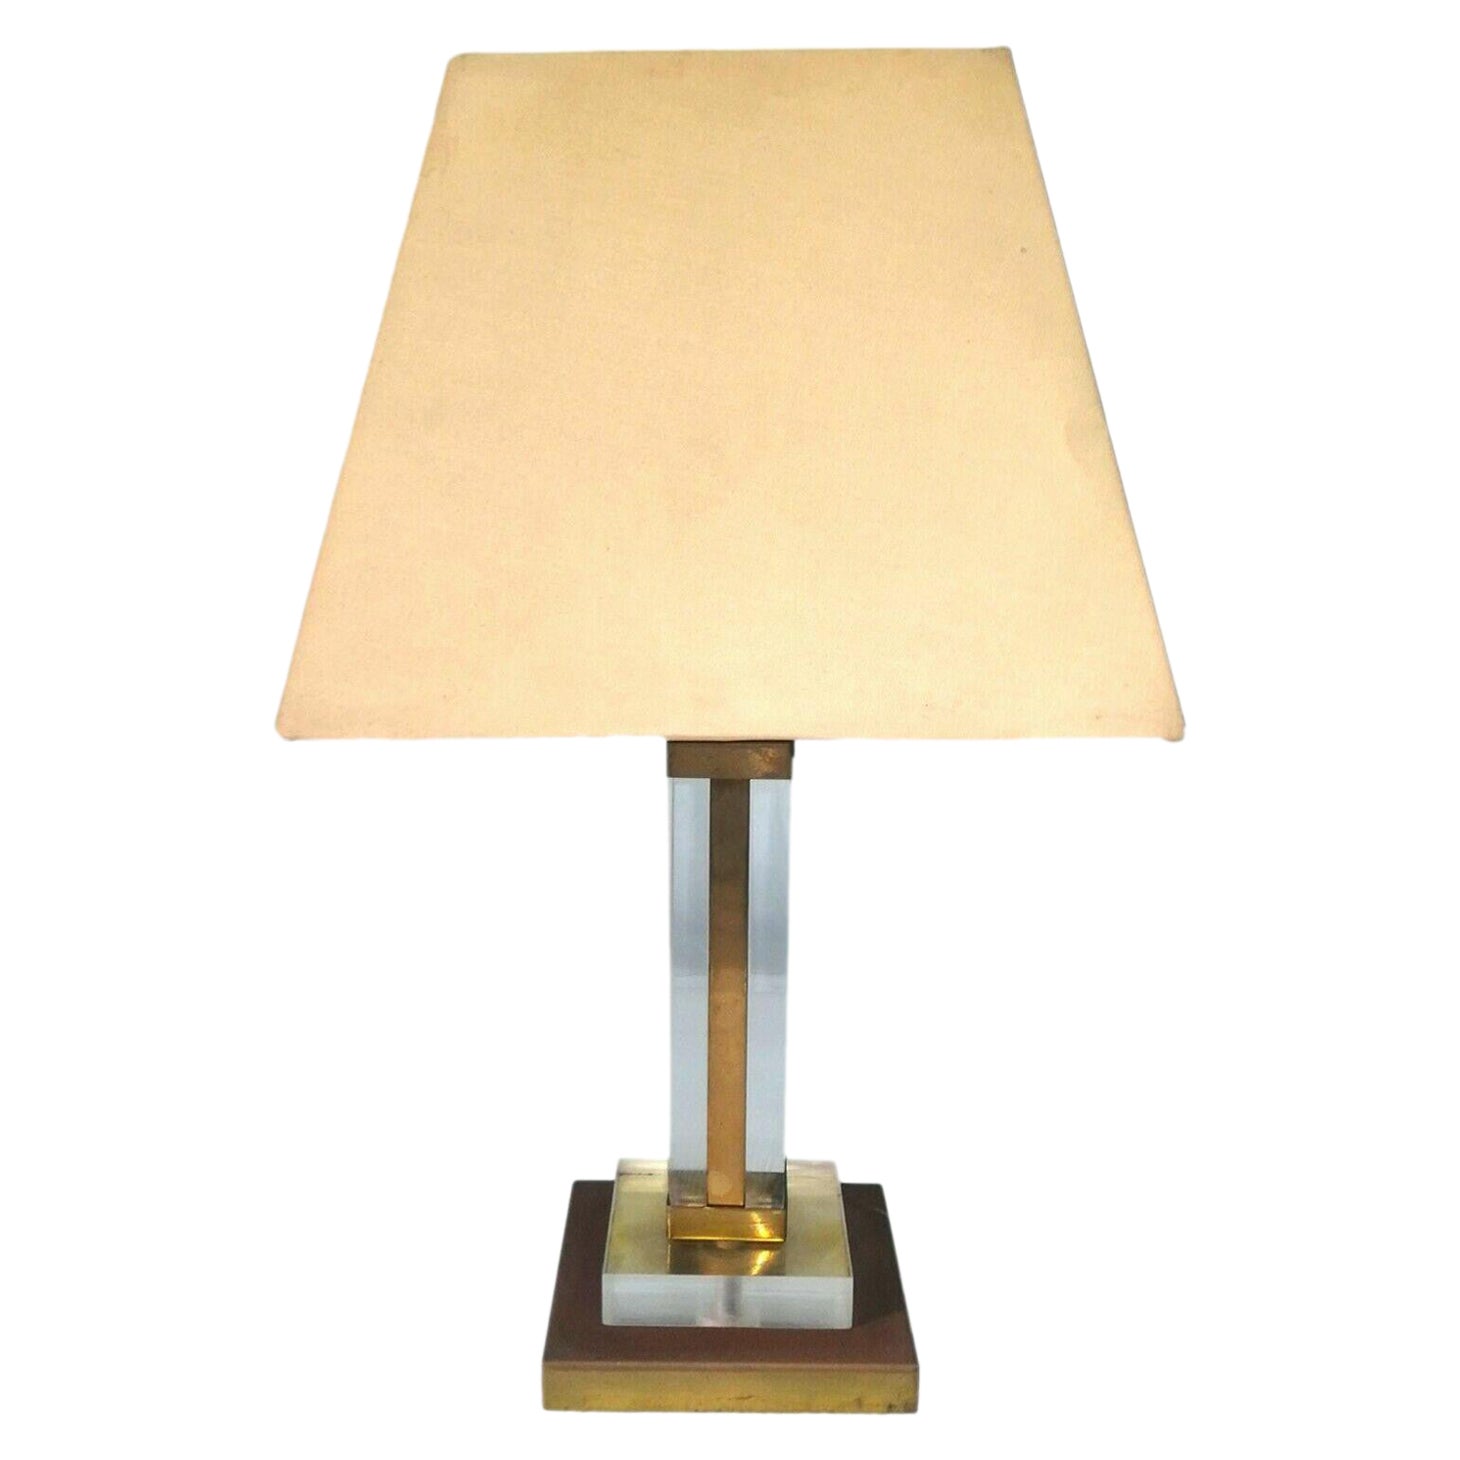 Table Lamp in Lucite "Samantha" Manufacture Corinne Halna, 1970s